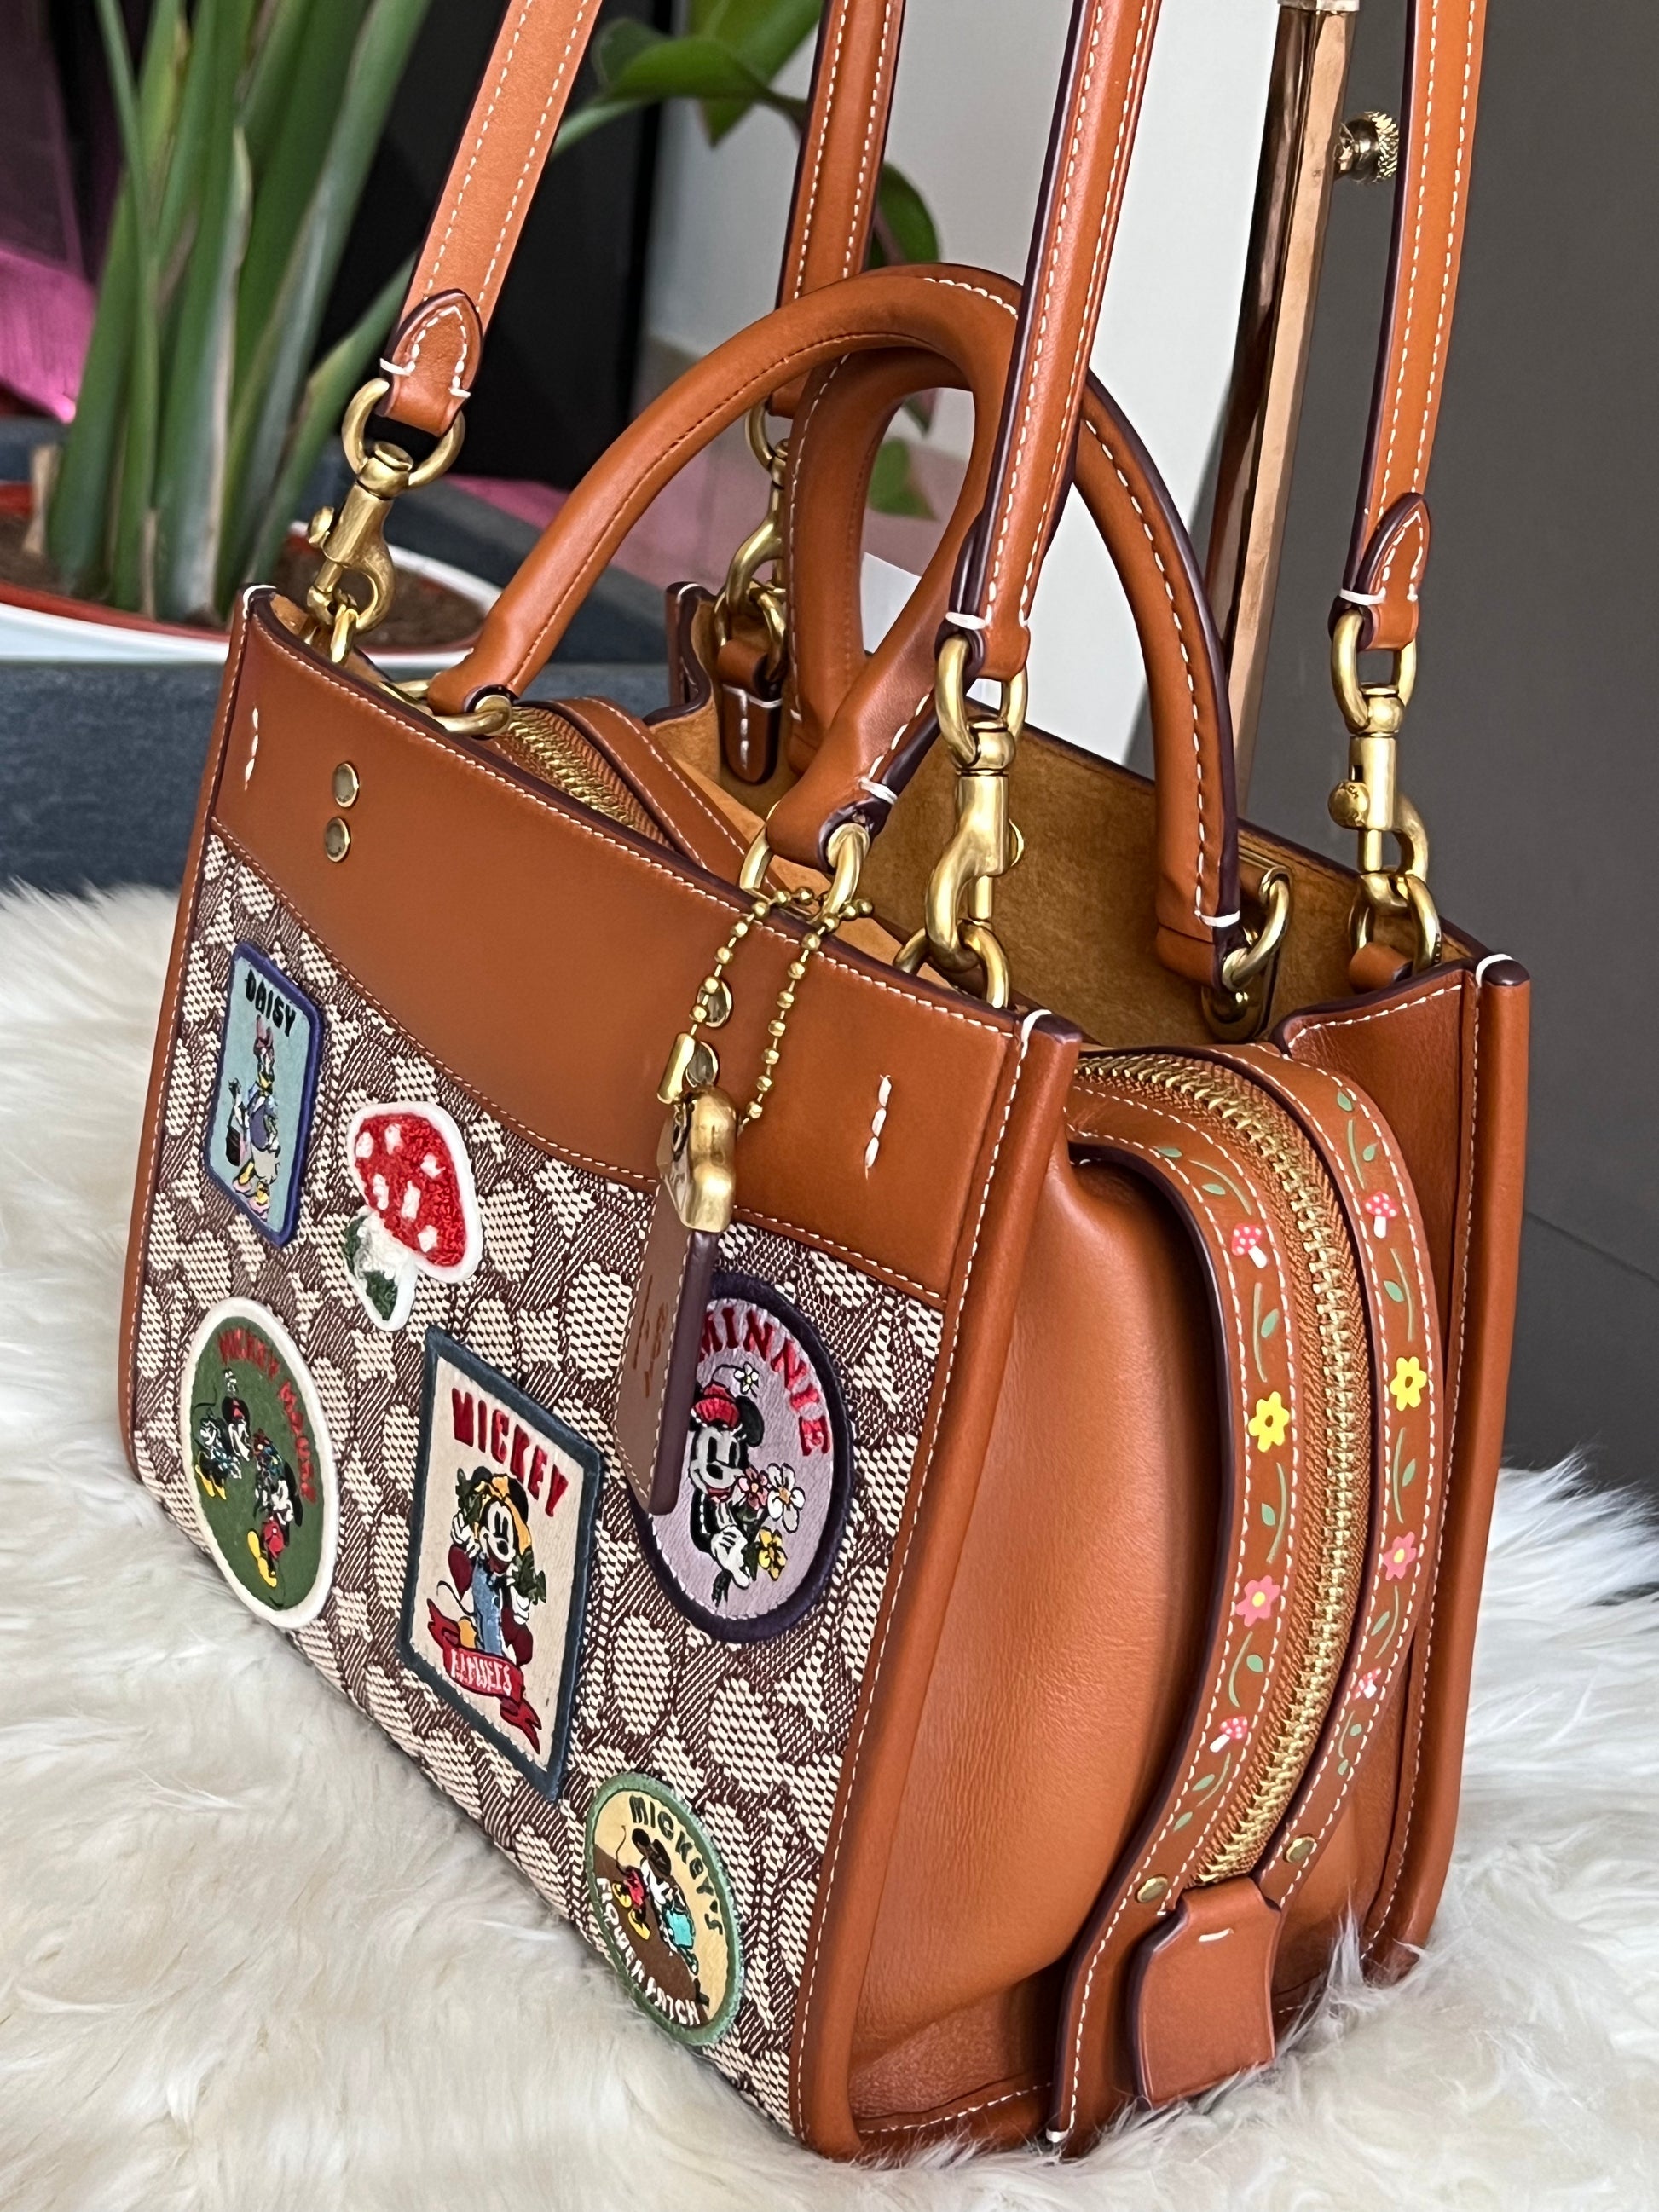 Coach x Disney Rogue 25 Cocoa/Multi in Canvas/Leather with Gold